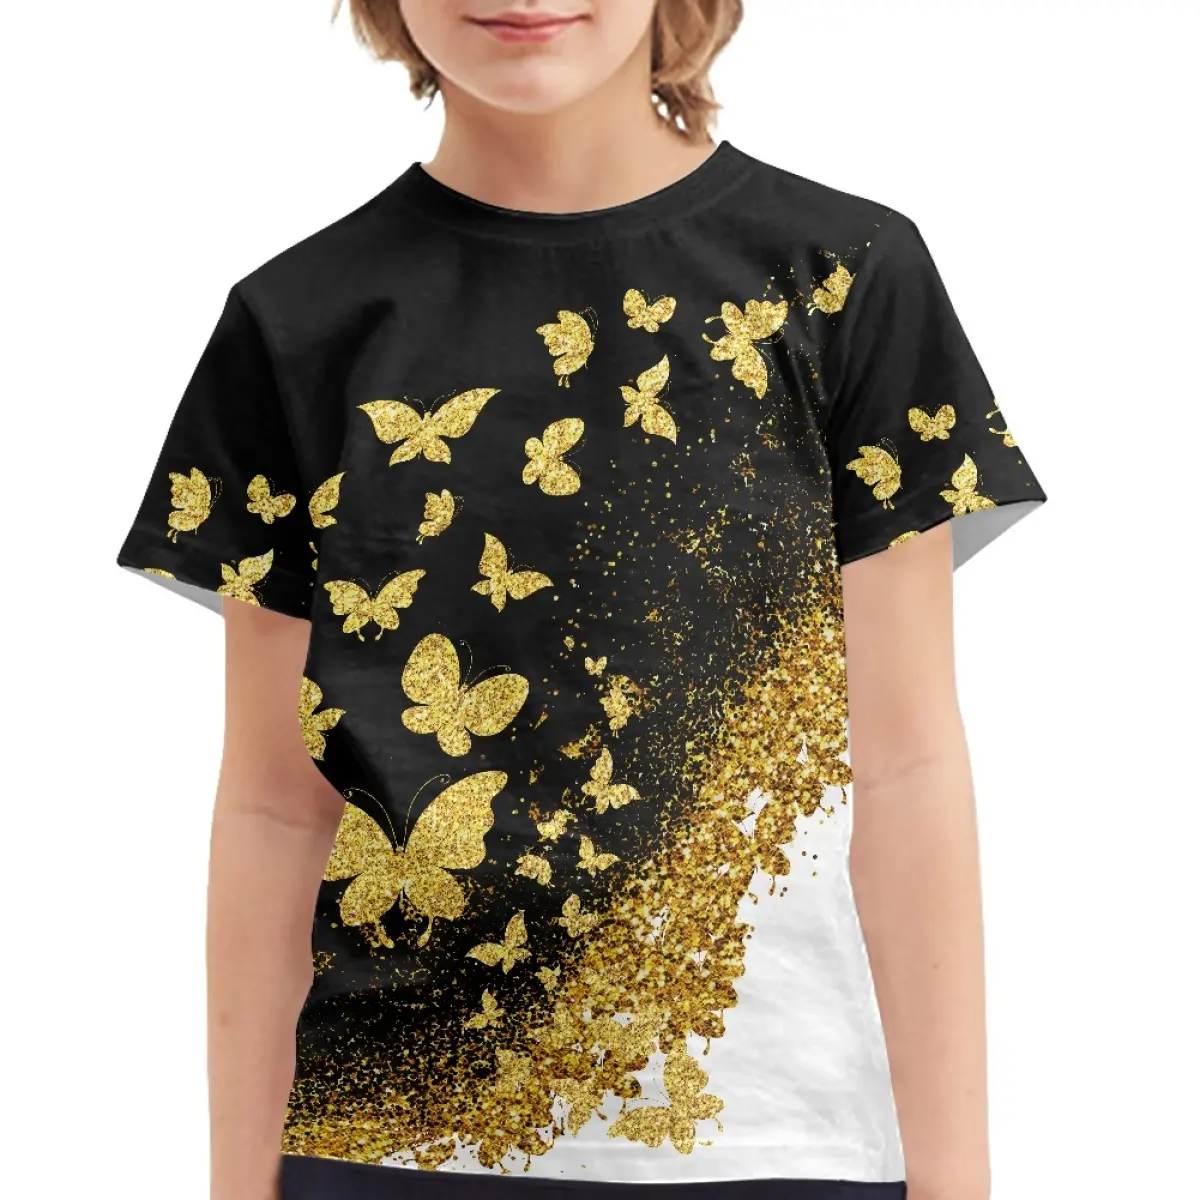 Golden Butterfly Patterns Designs Kids T-shirts Cute Boys Girls Tops Summer Fashion Animal Clothes Tshirt Customize Logo/Image